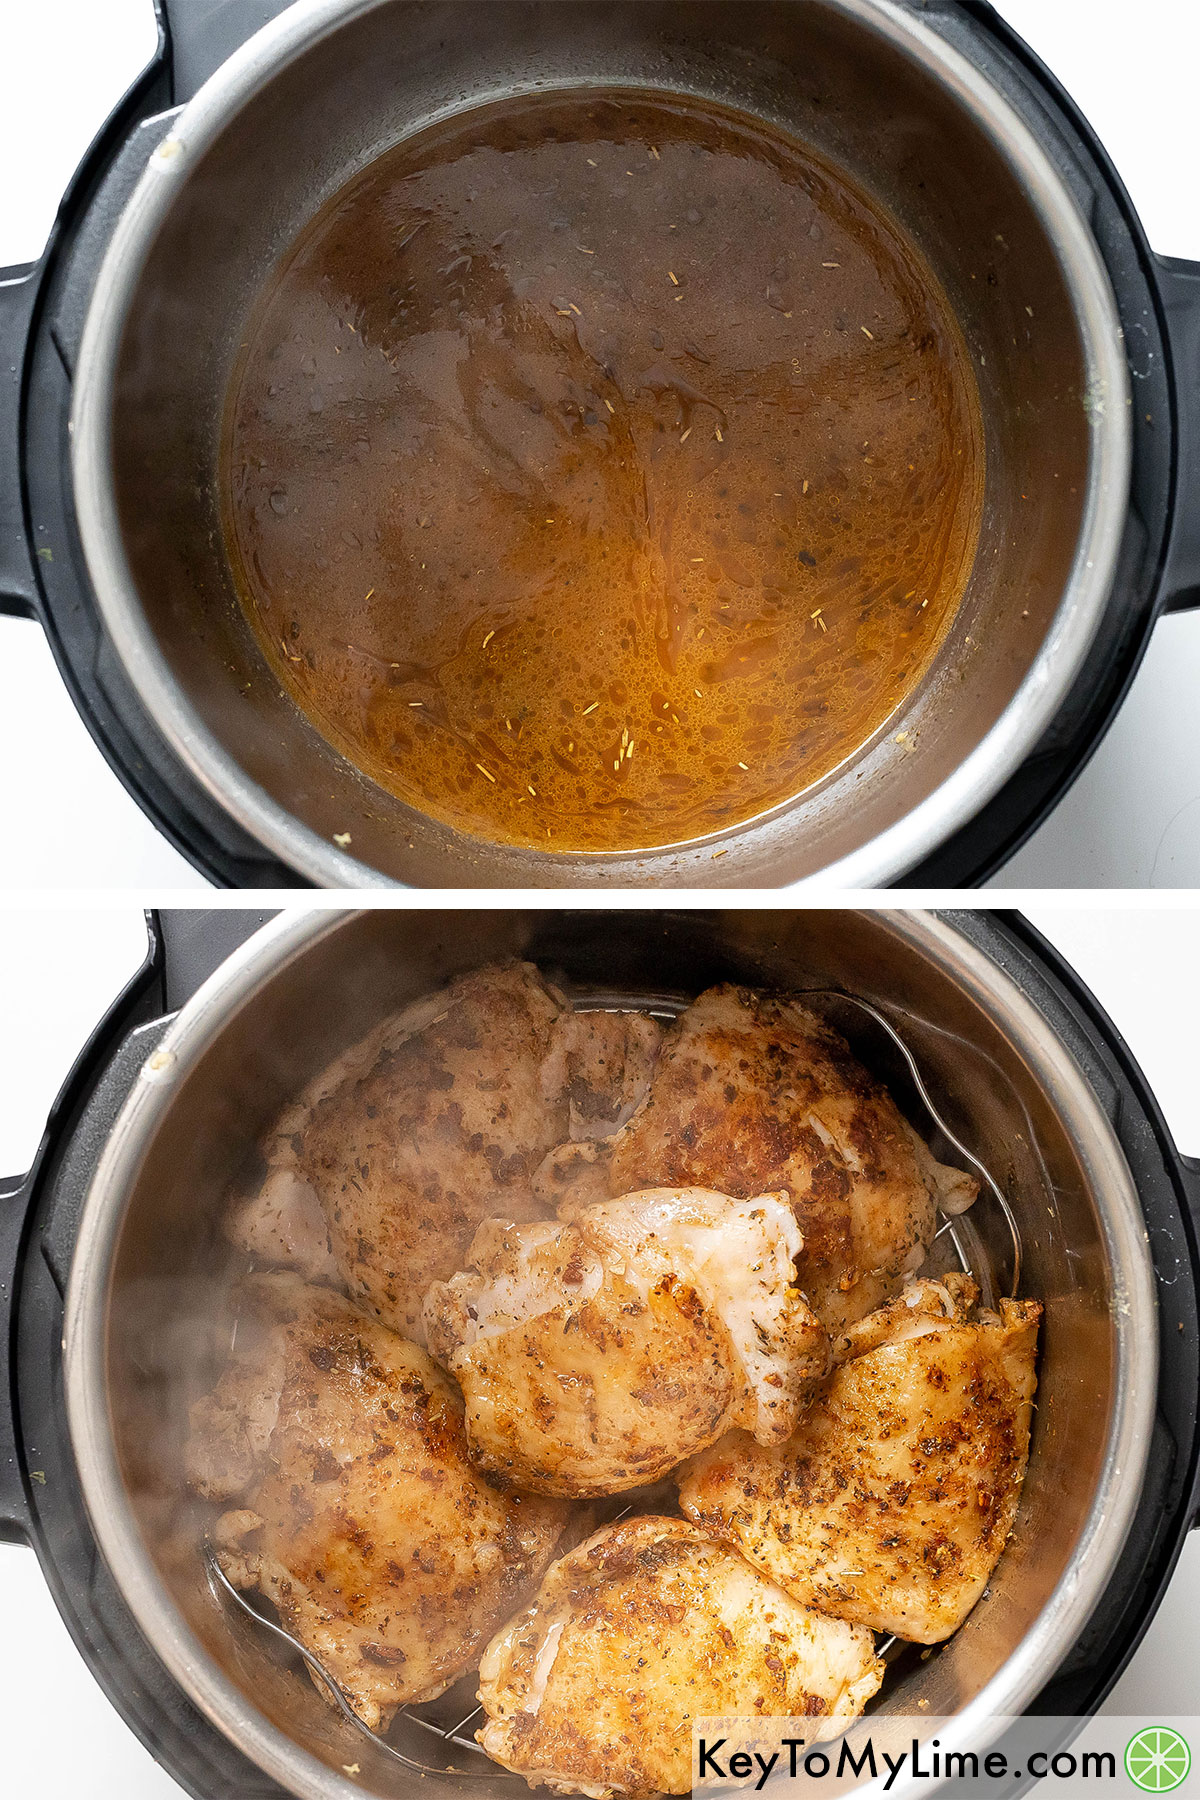 Deglazing the Instant Pot insert then placing the chicken on the trivet.